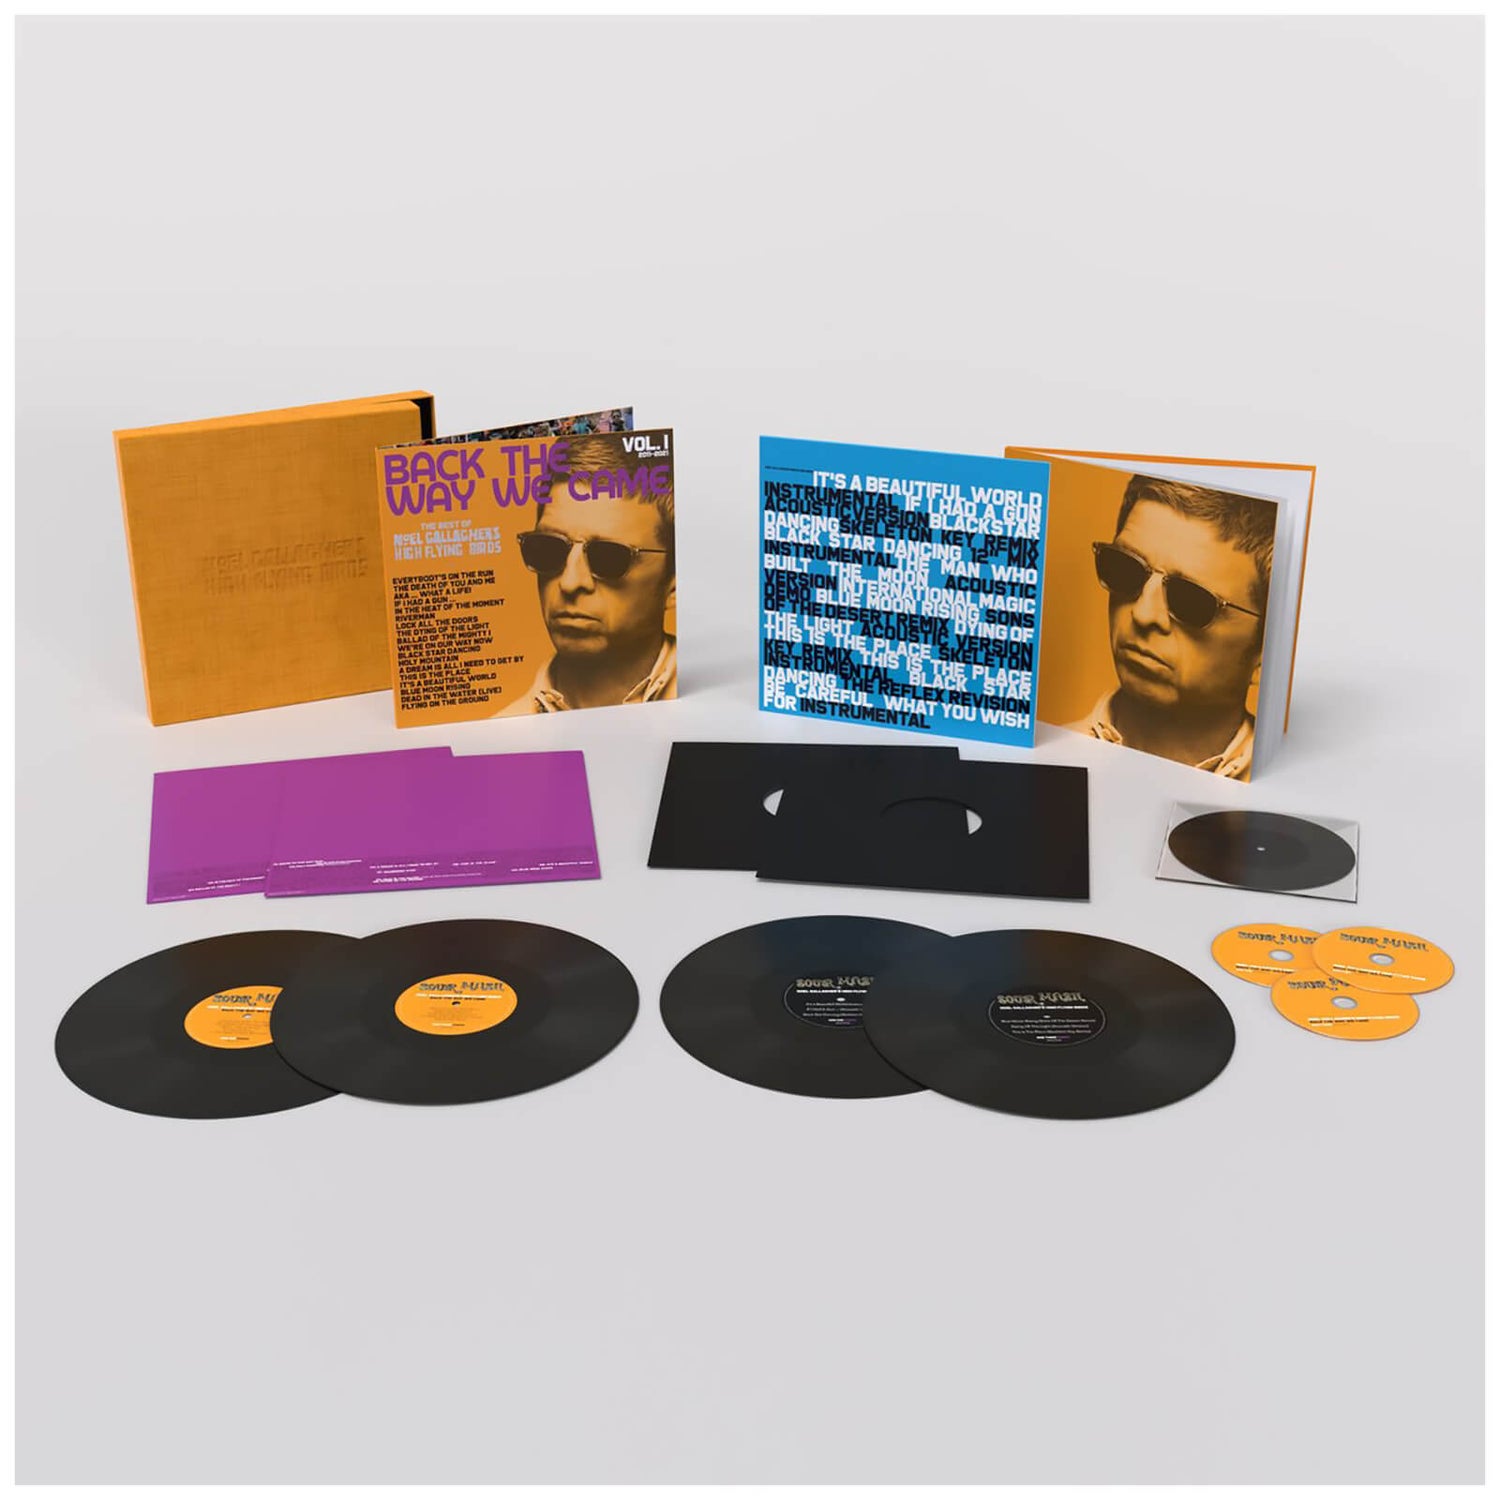 Noel Gallagher's High Flying Birds - Back The Way We Came: Vol. 1 (2011-2021) (Deluxe Edition) Vinyl Box Set